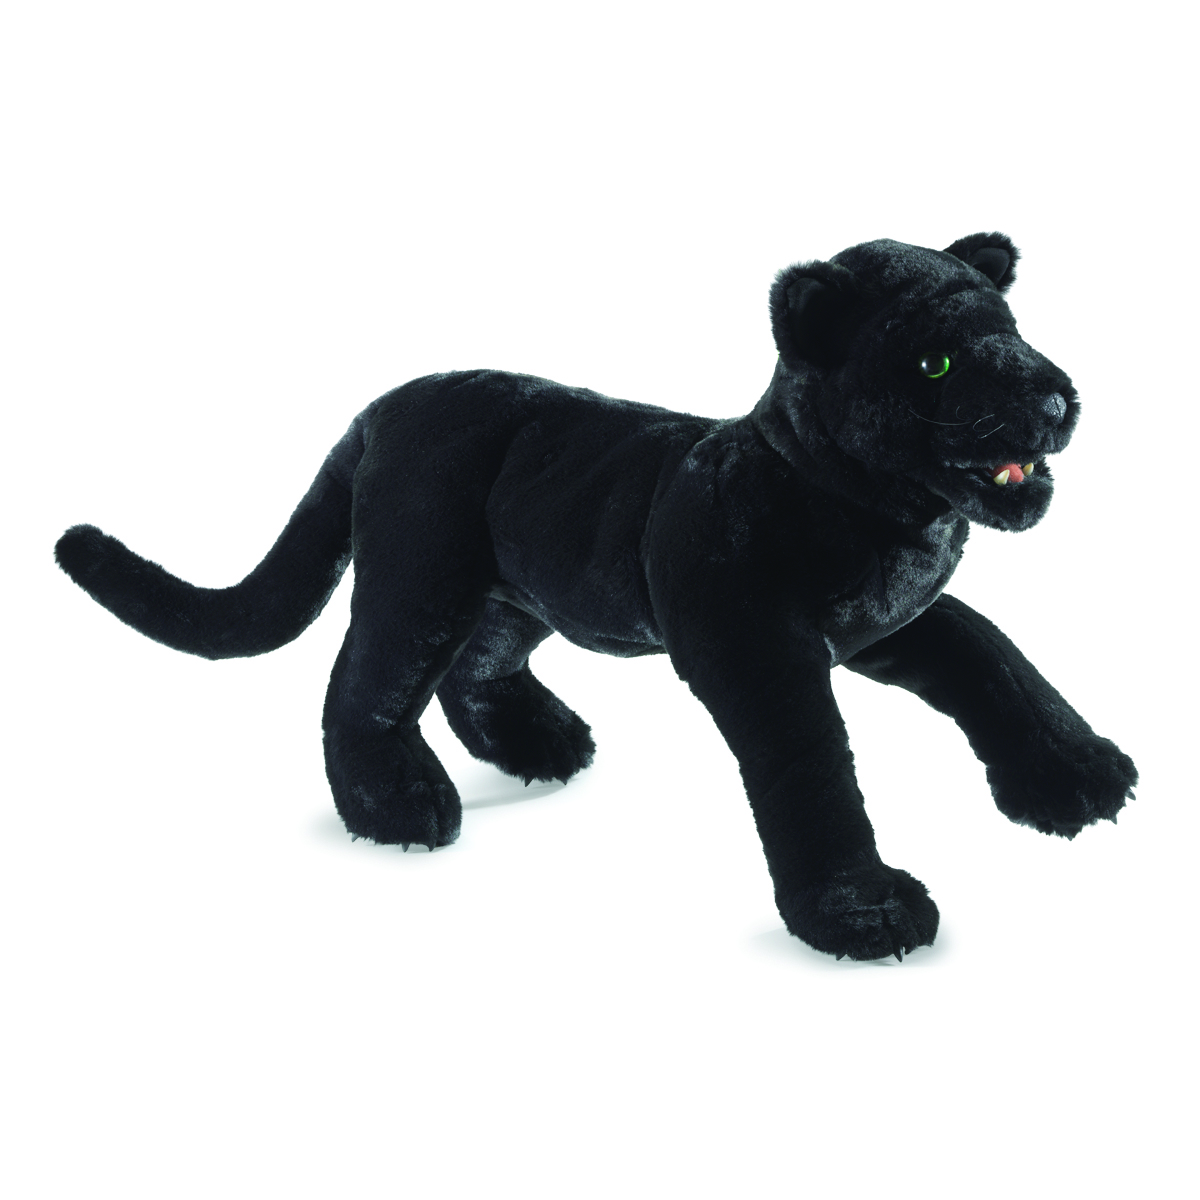 Folkmanis hand puppet black panther